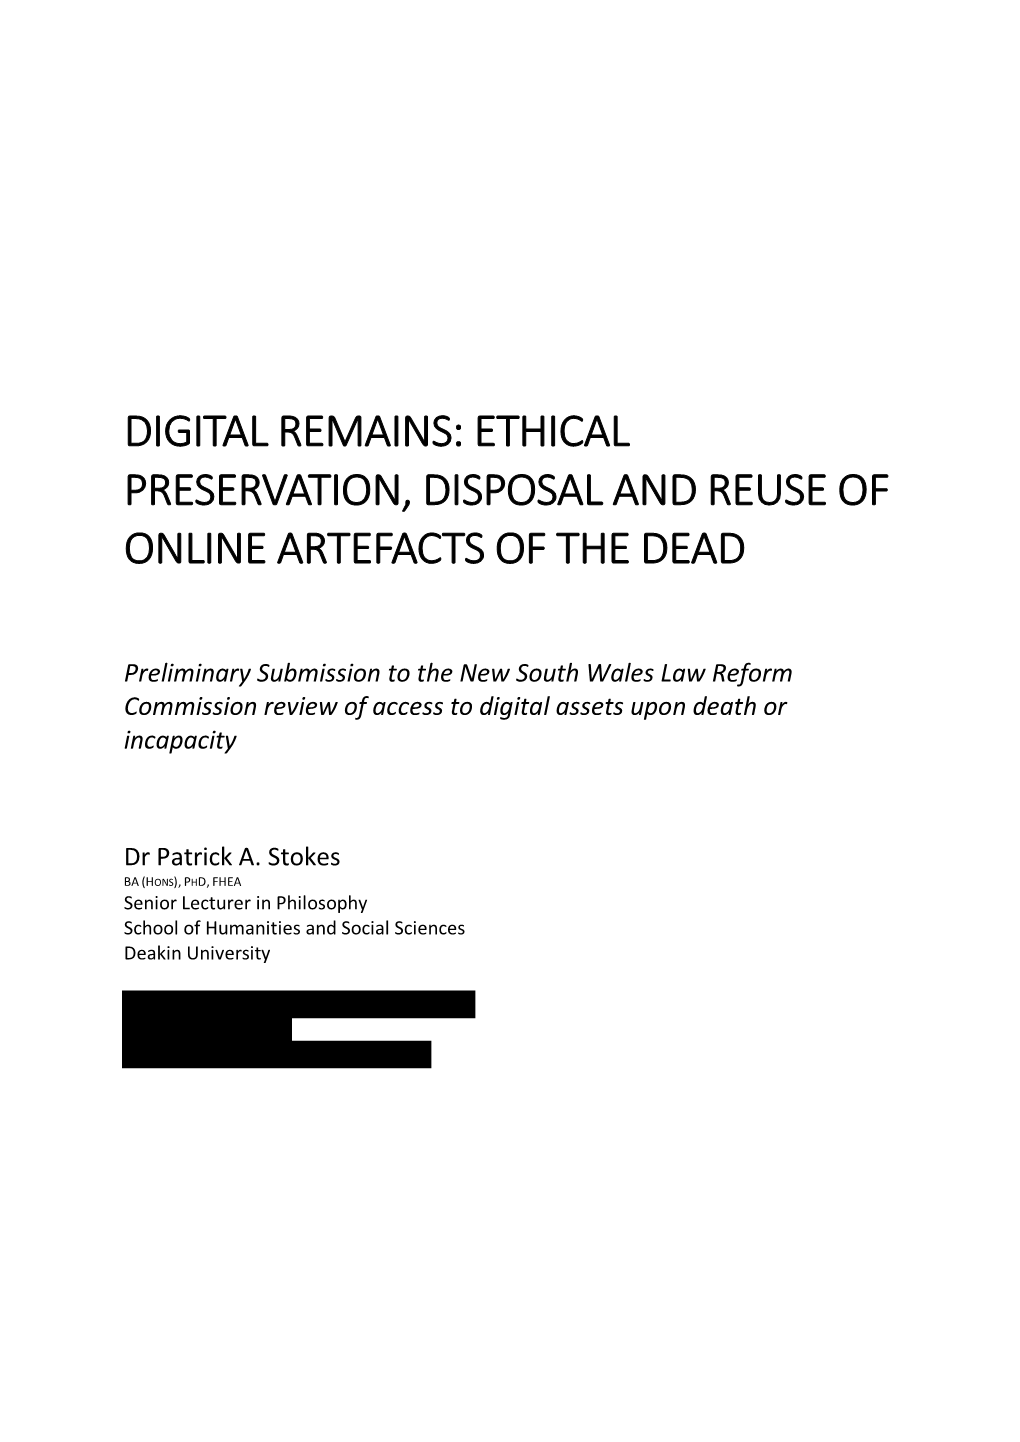 Digital Remains: Ethical Preservation, Disposal and Reuse of Online Artefacts of the Dead